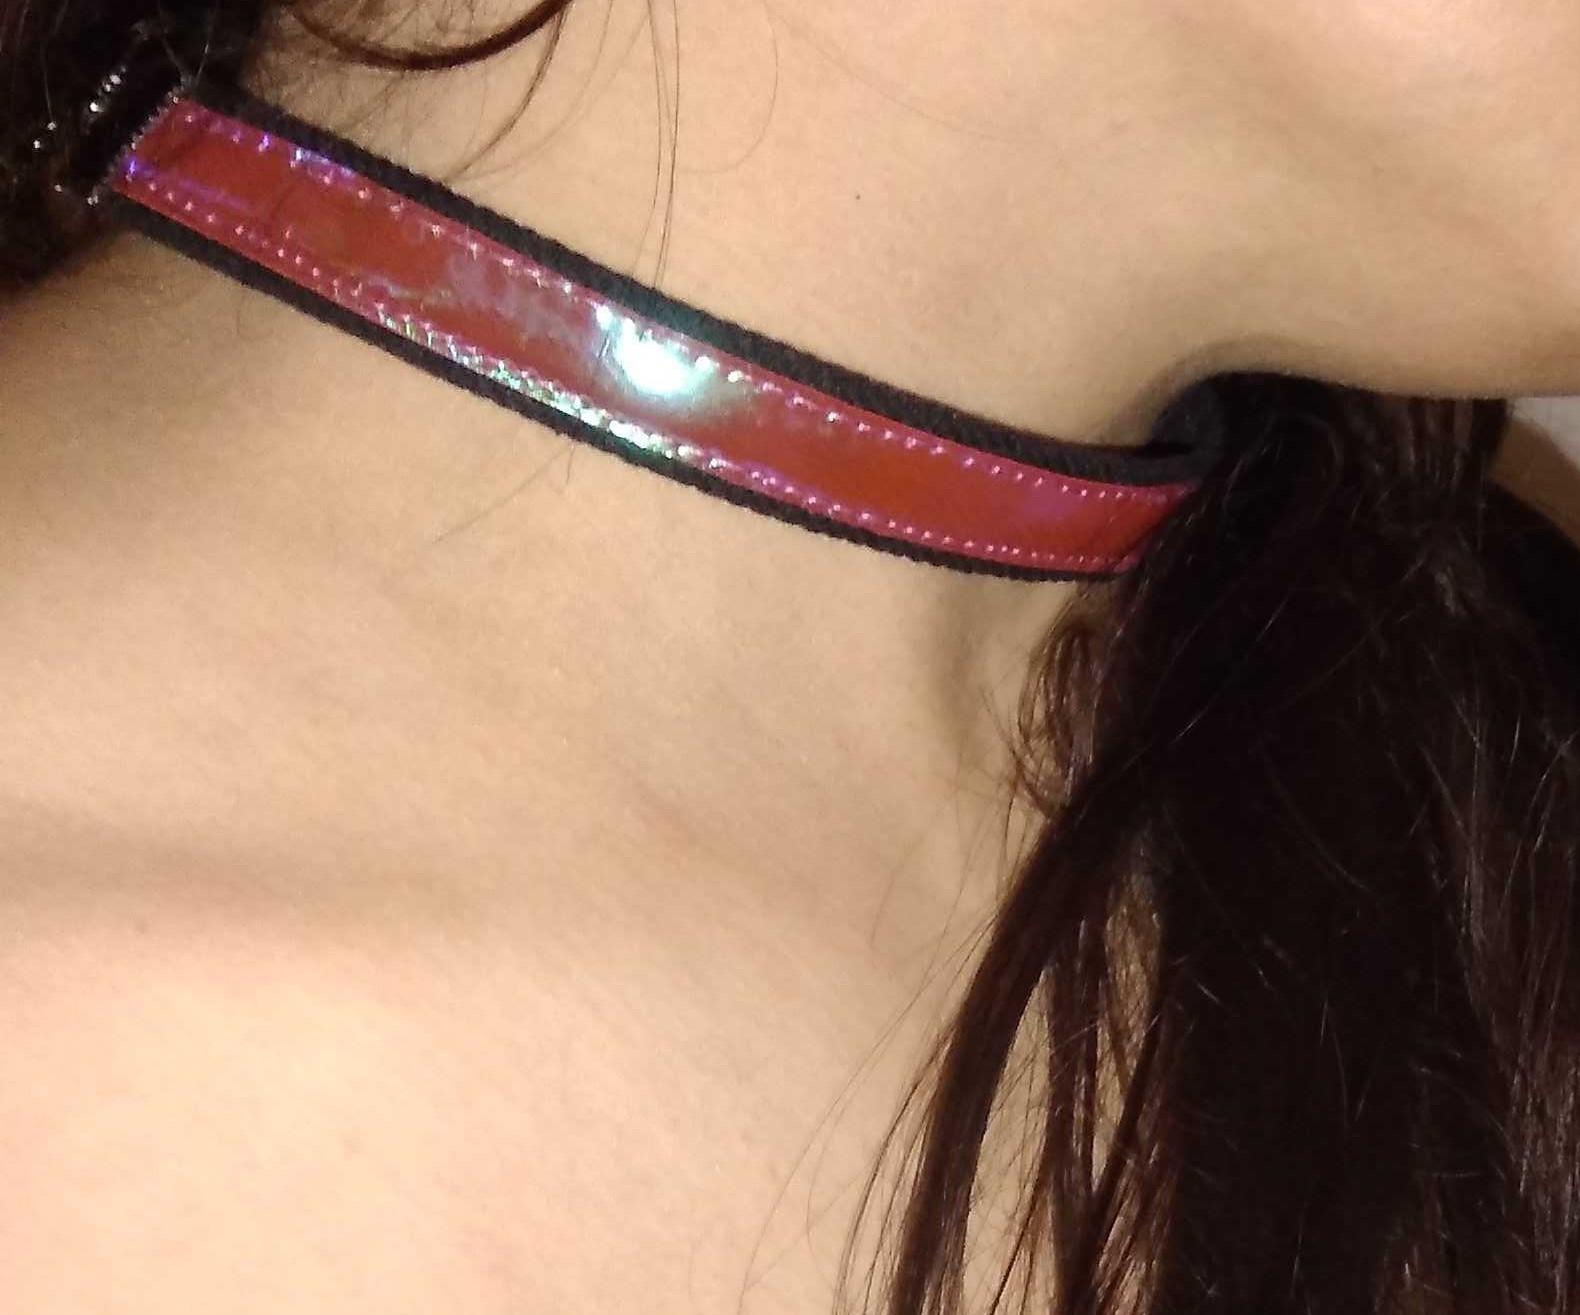 Choker Necklace Made With Denim and Headlight Vinyl